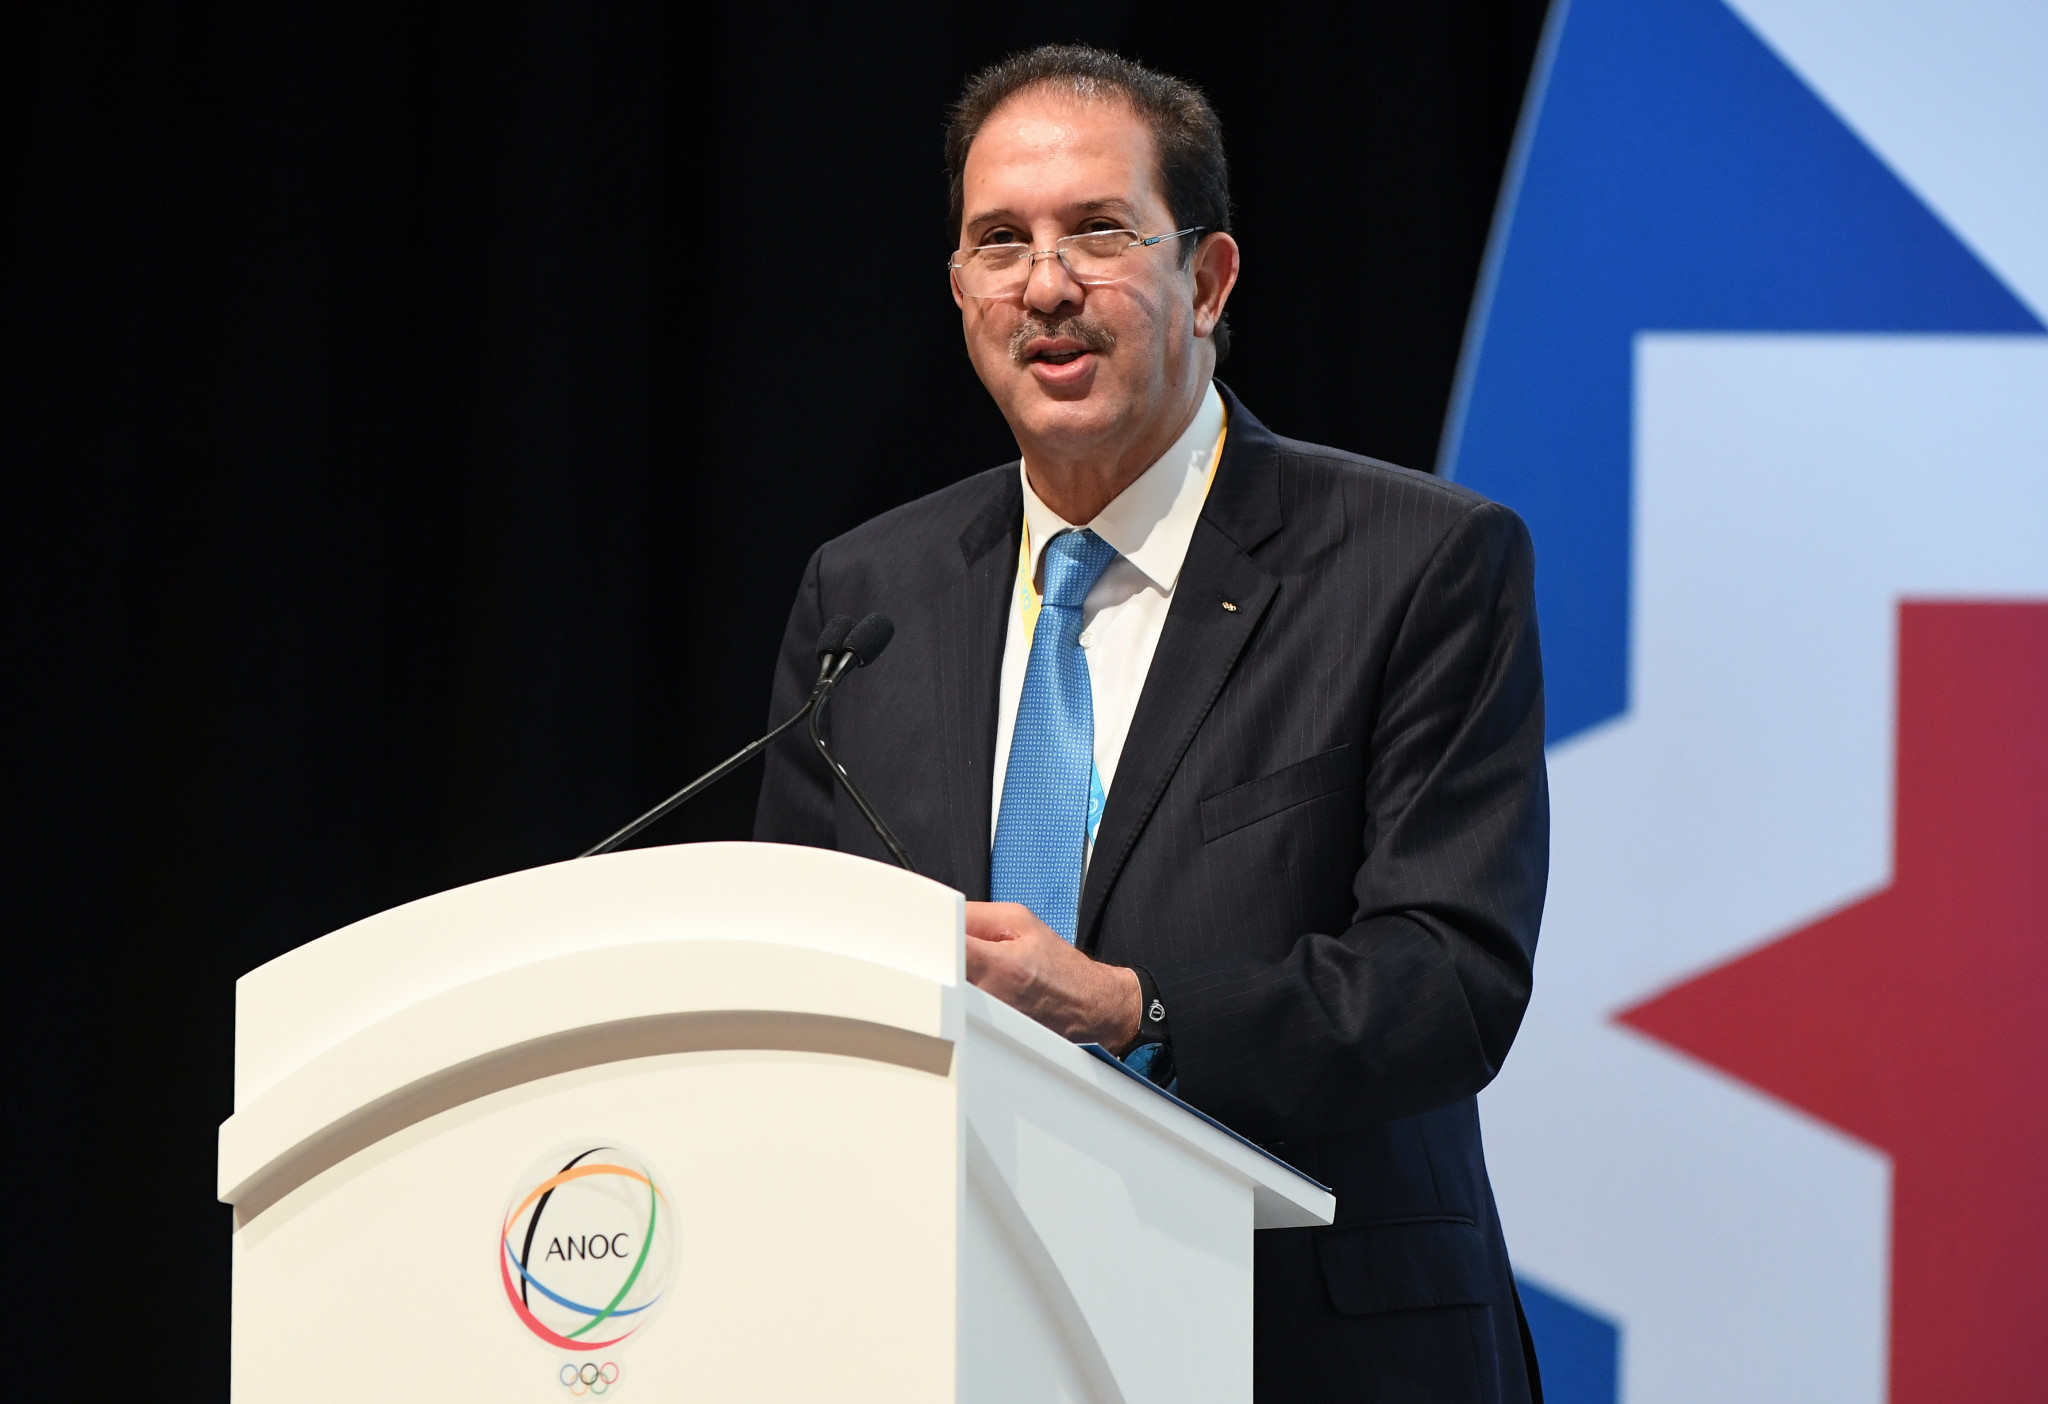 Mustapha Berraf has said he believes Tokyo 2020 will survive the coronavirus crisis and go ahead as planned ©Getty Images